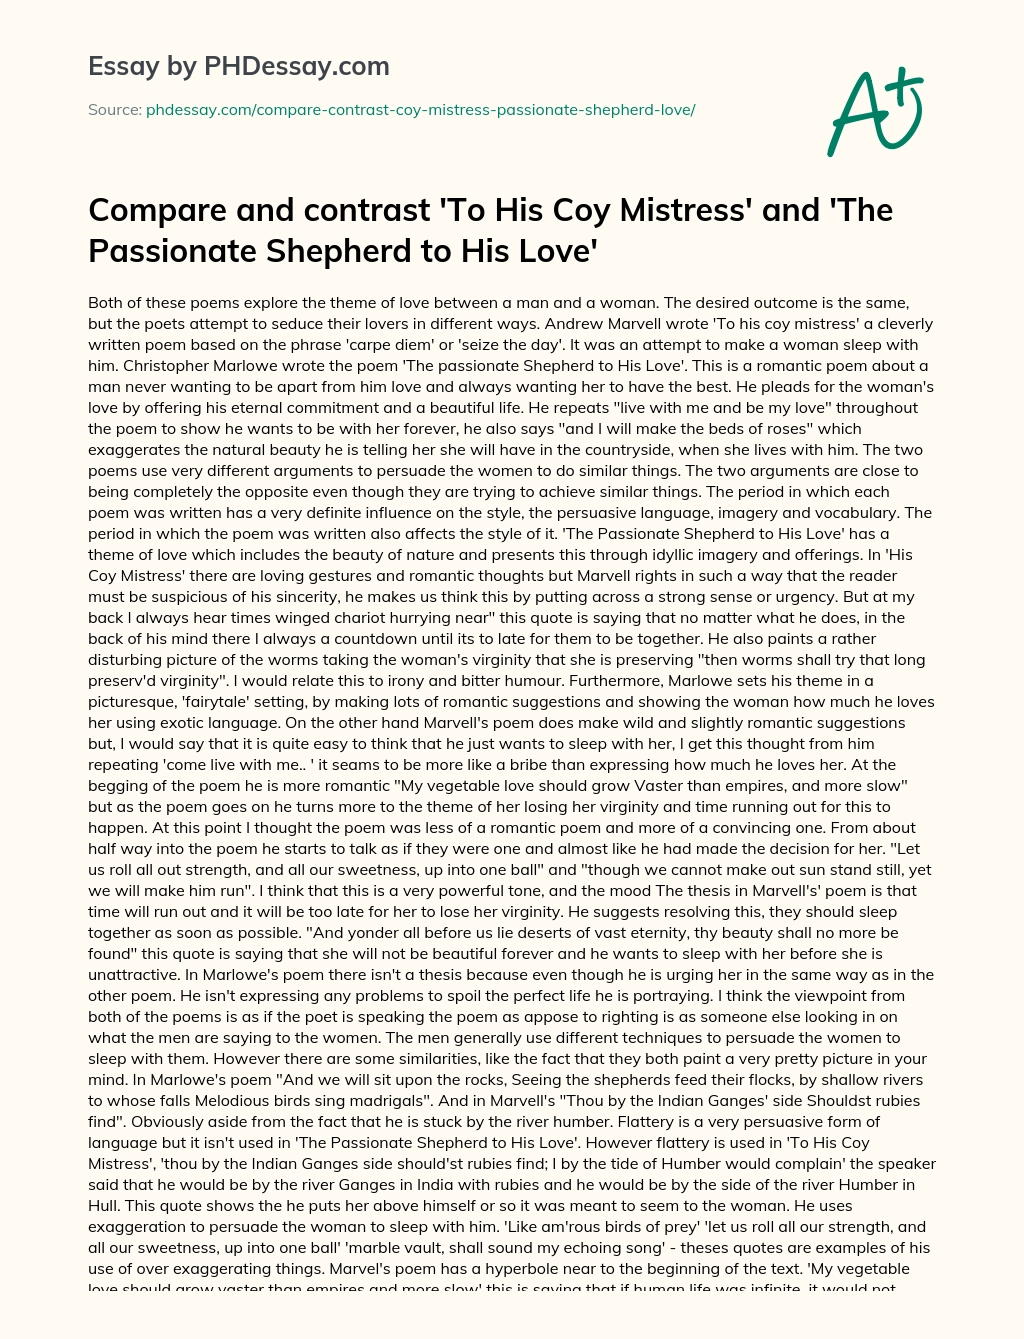 Compare and contrast ‘To His Coy Mistress’ and ‘The Passionate Shepherd to His Love’ essay